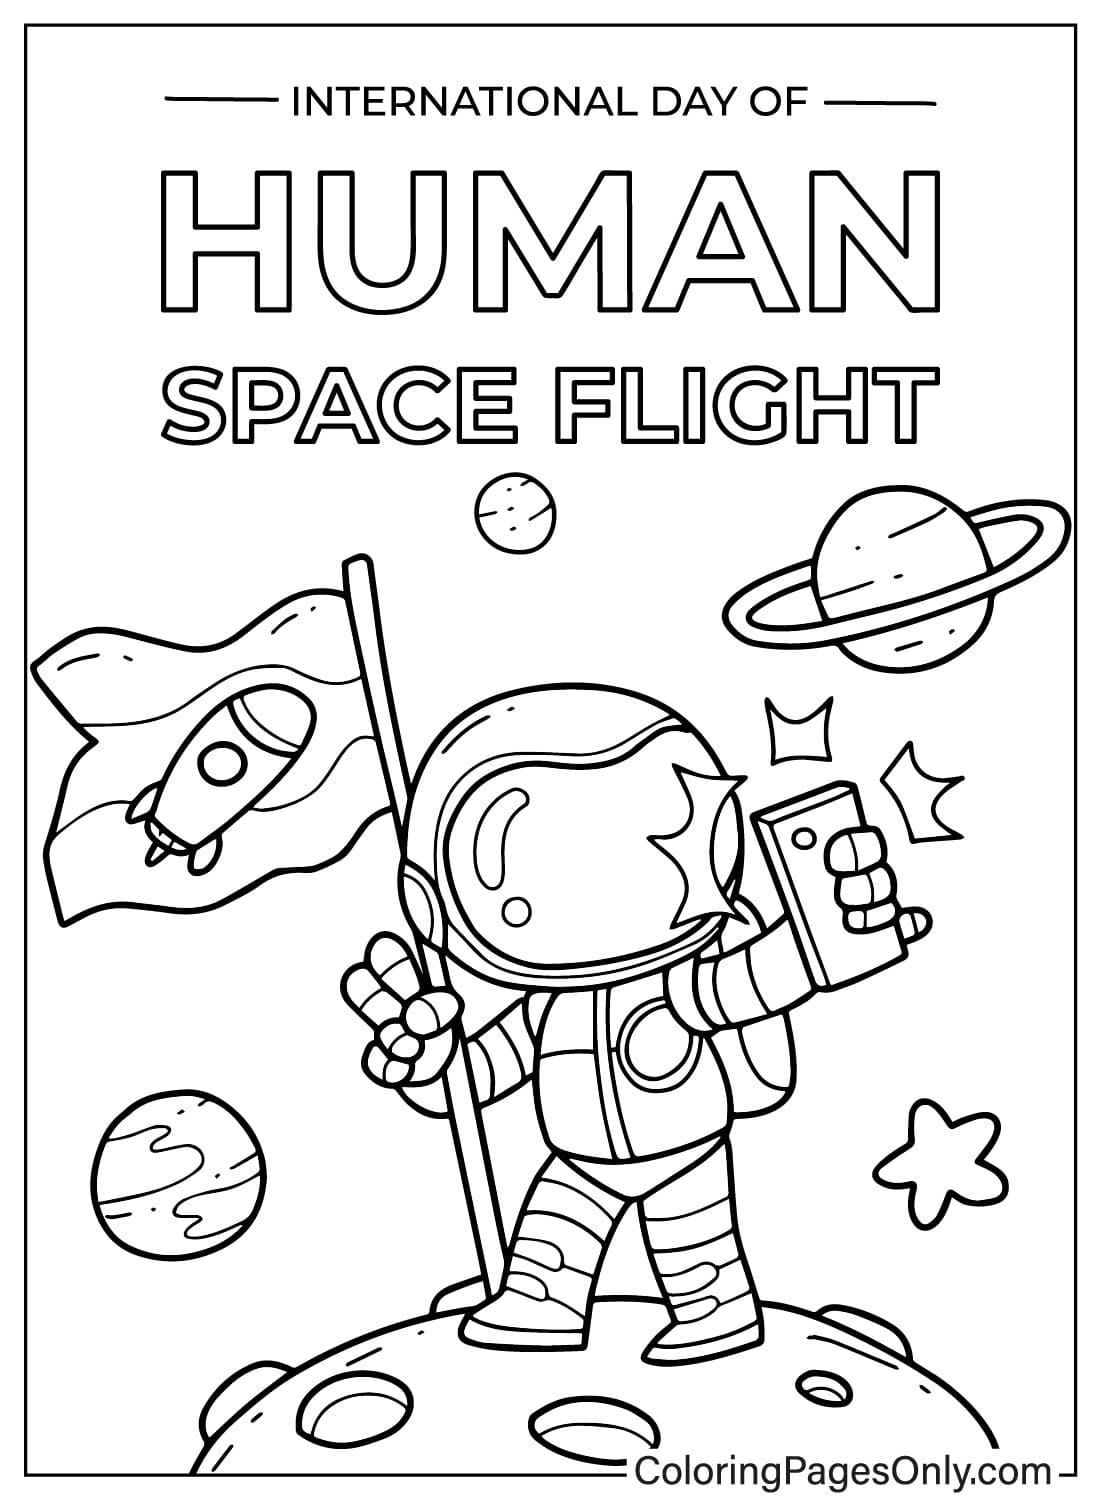 Drawing International Day of Human Space Flight Coloring Page from International Day of Human Space Flight